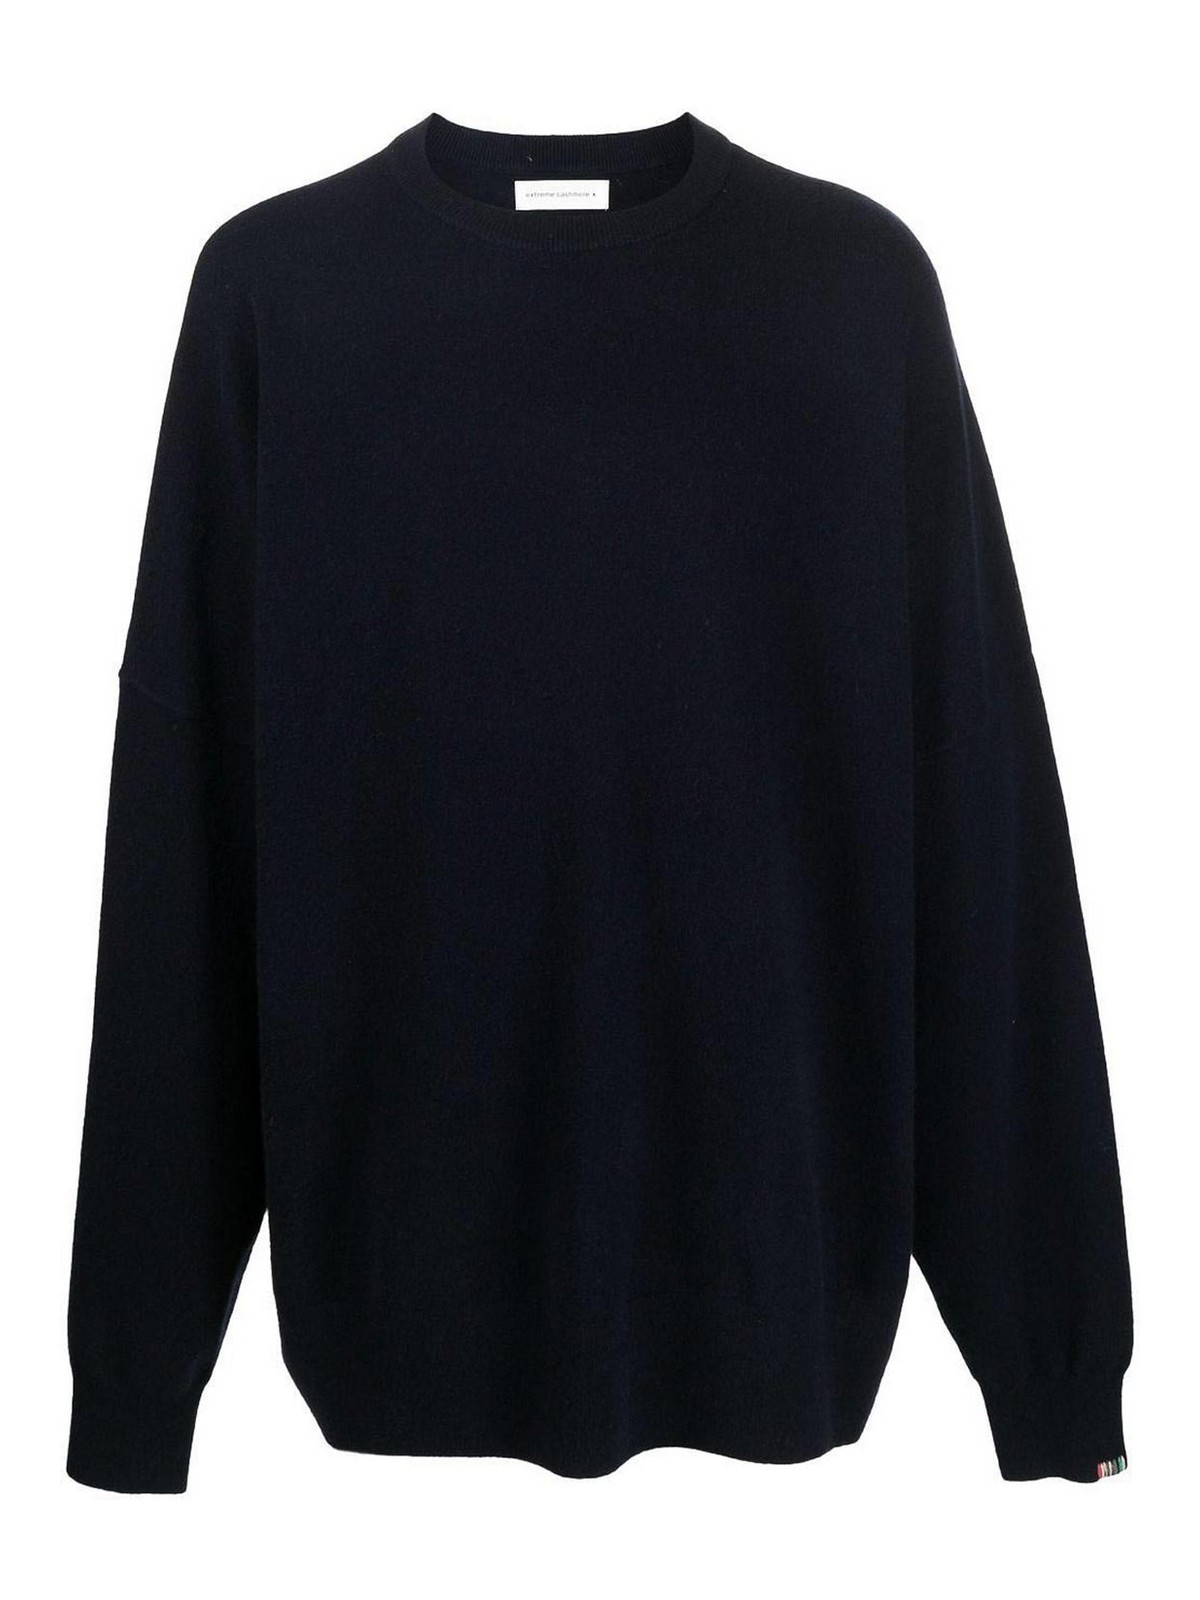 extreme cashmere crew-neck sweater n°167 please – 100% cashmere